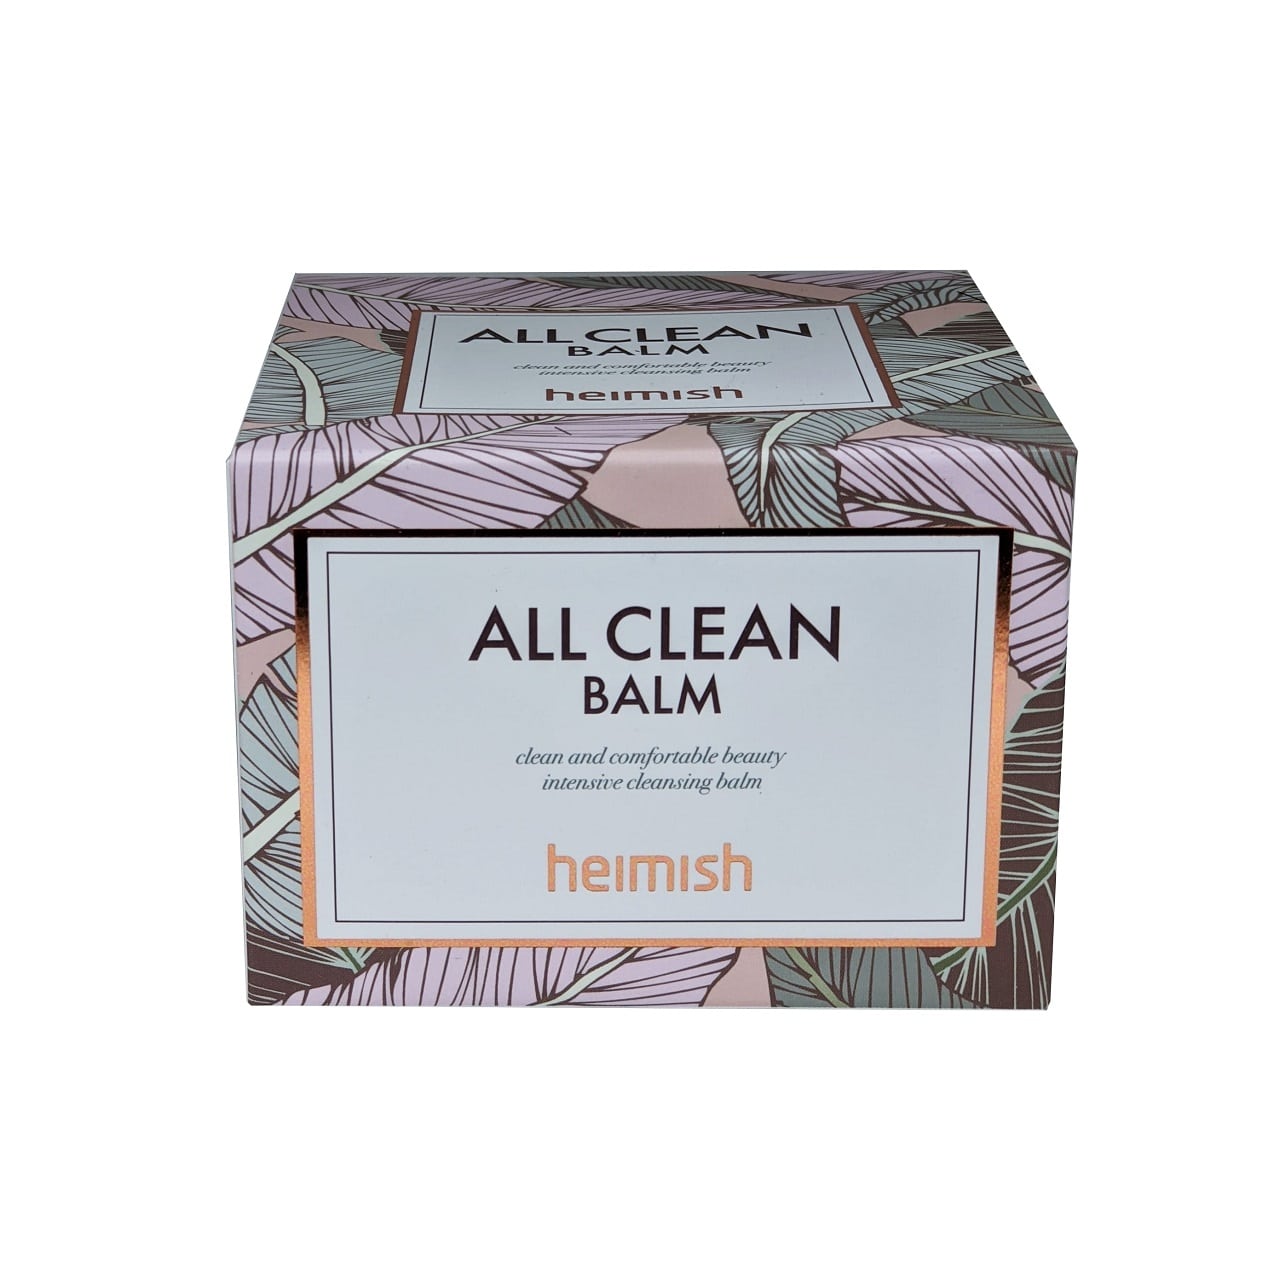 Product label for Heimish All Clean Balm